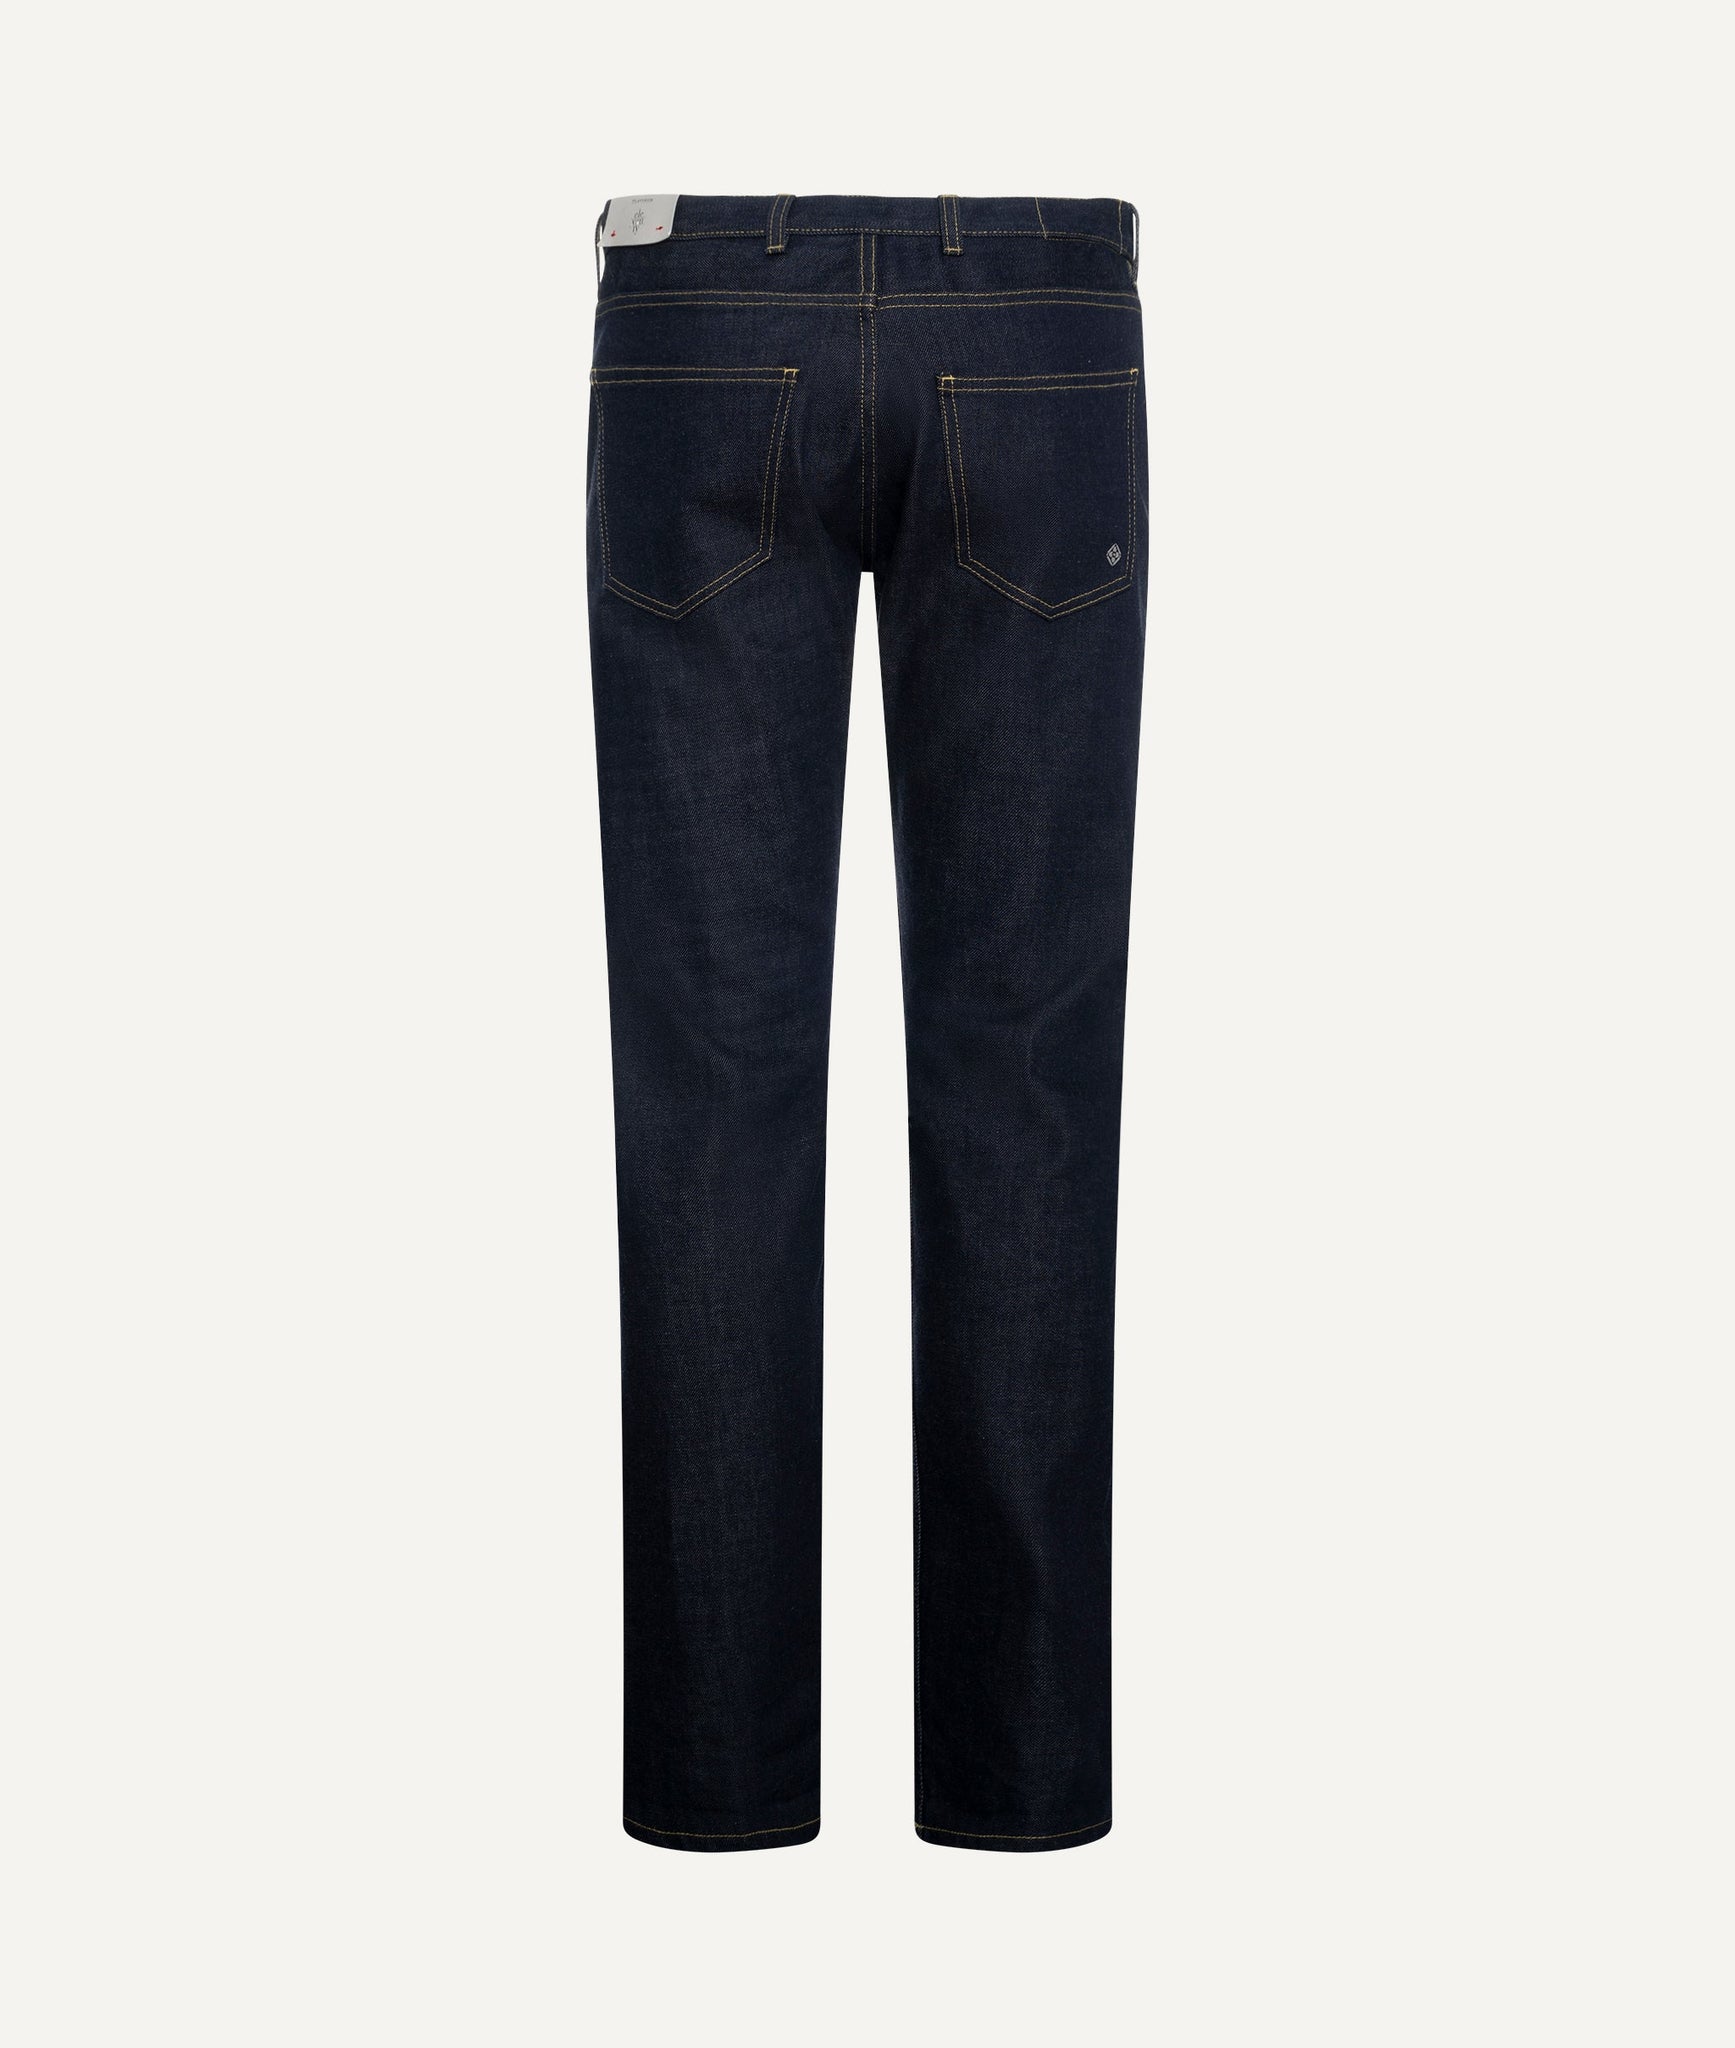 Eleventy - Jeans in Cotton